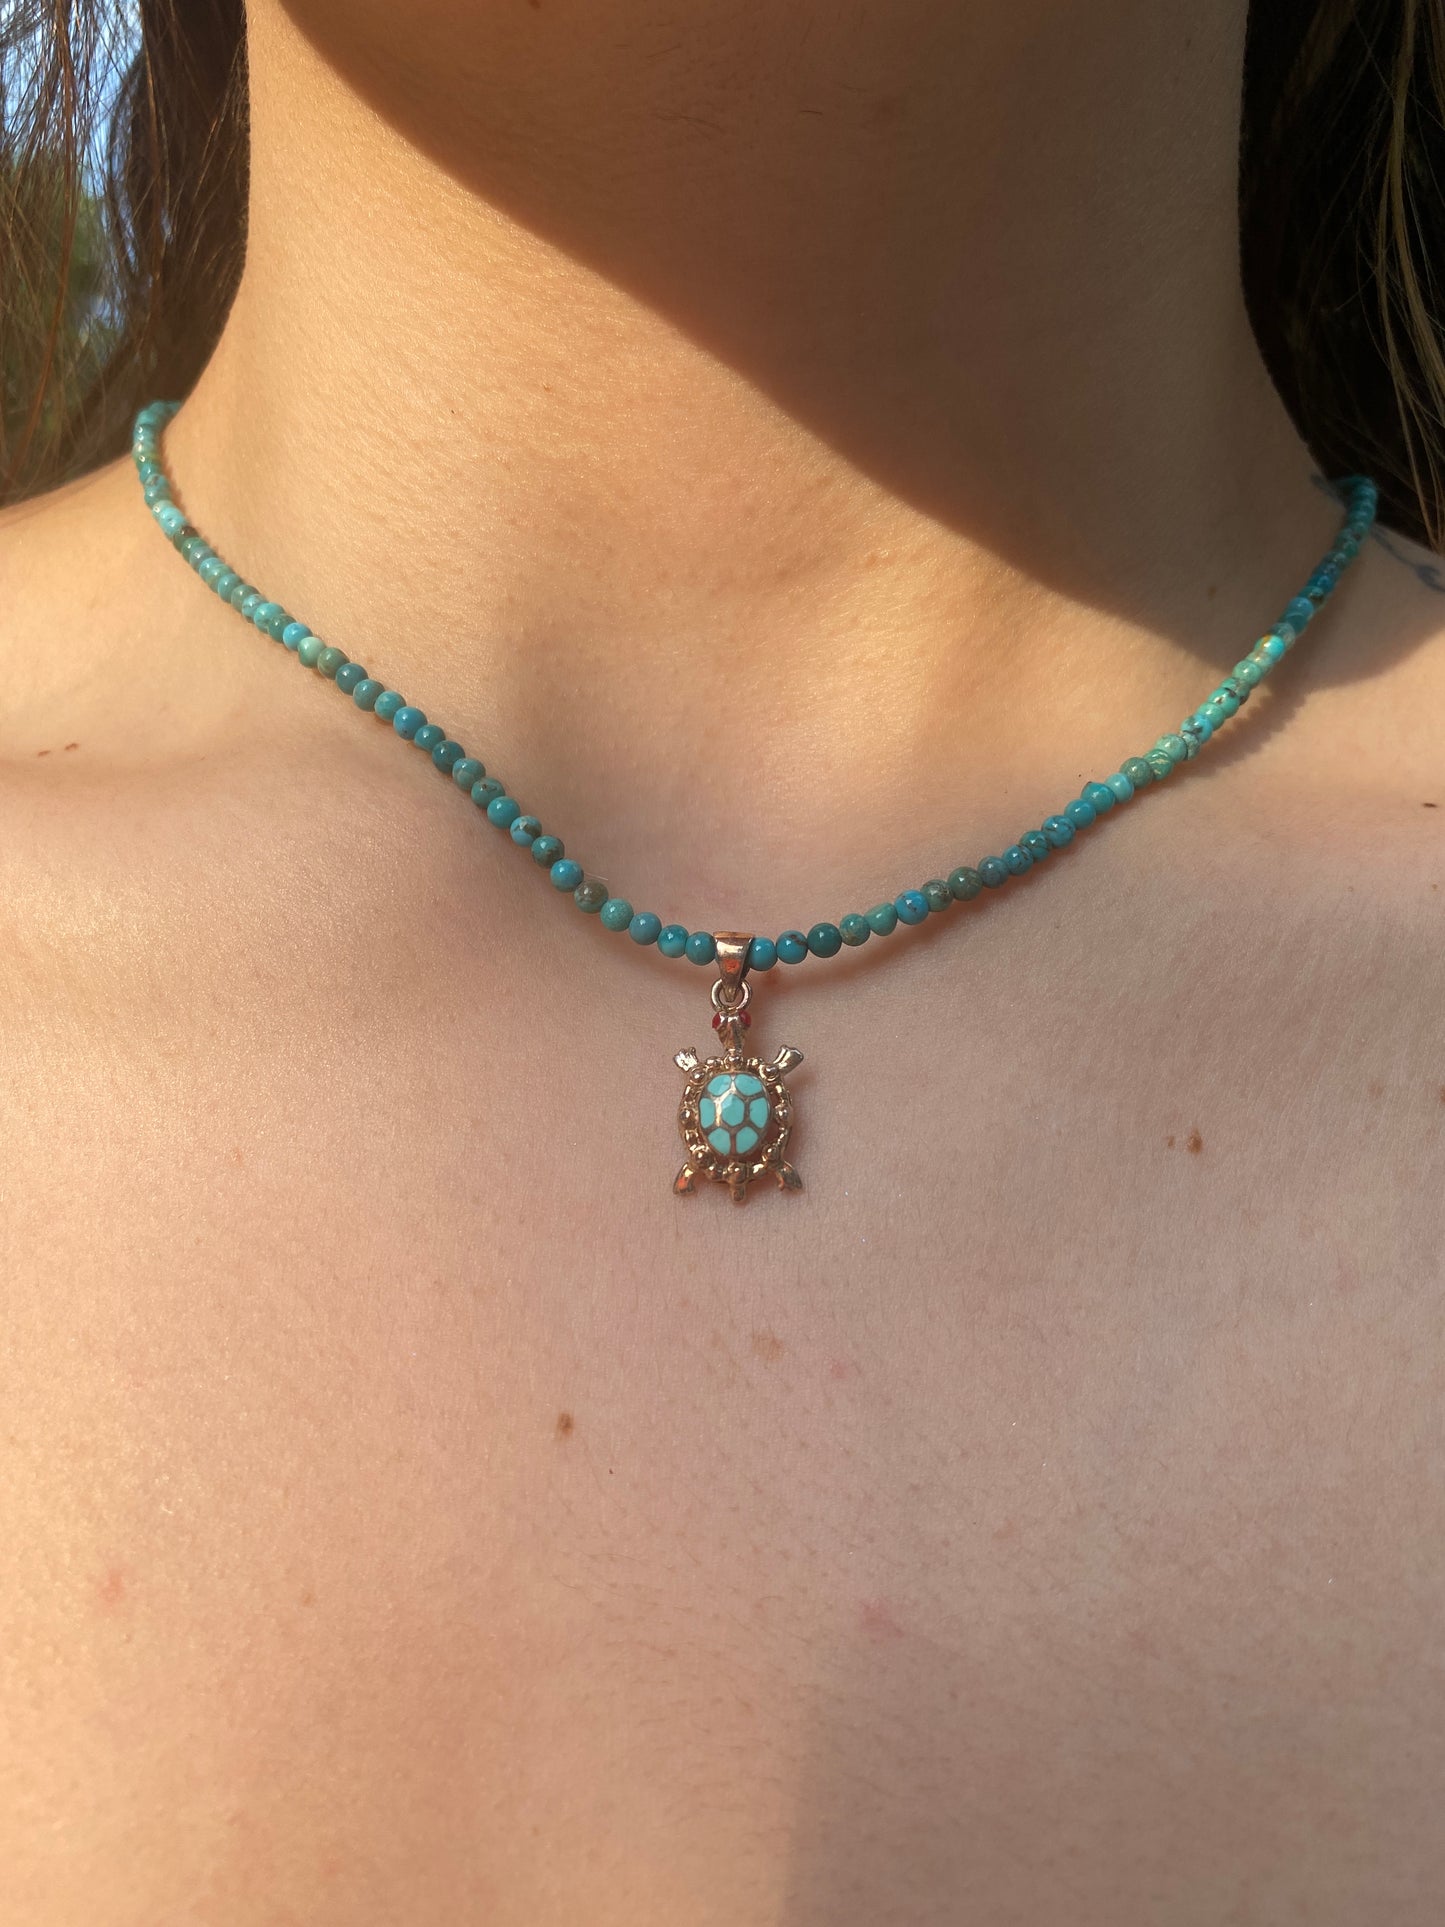 Turquoise Turtle Beaded Necklace